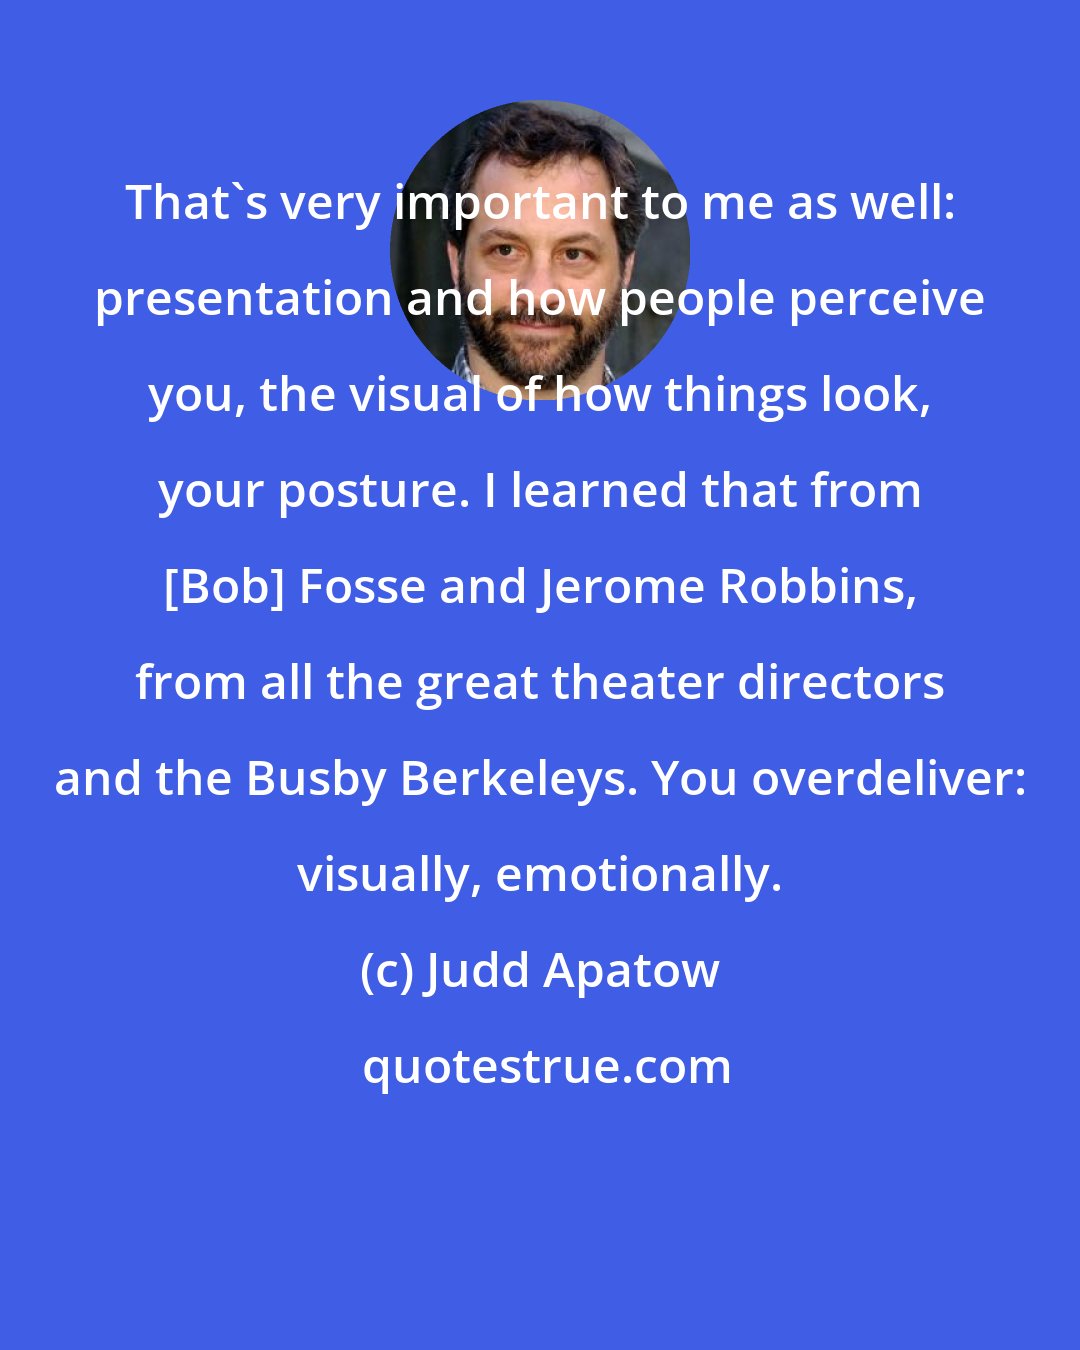 Judd Apatow: That's very important to me as well: presentation and how people perceive you, the visual of how things look, your posture. I learned that from [Bob] Fosse and Jerome Robbins, from all the great theater directors and the Busby Berkeleys. You overdeliver: visually, emotionally.